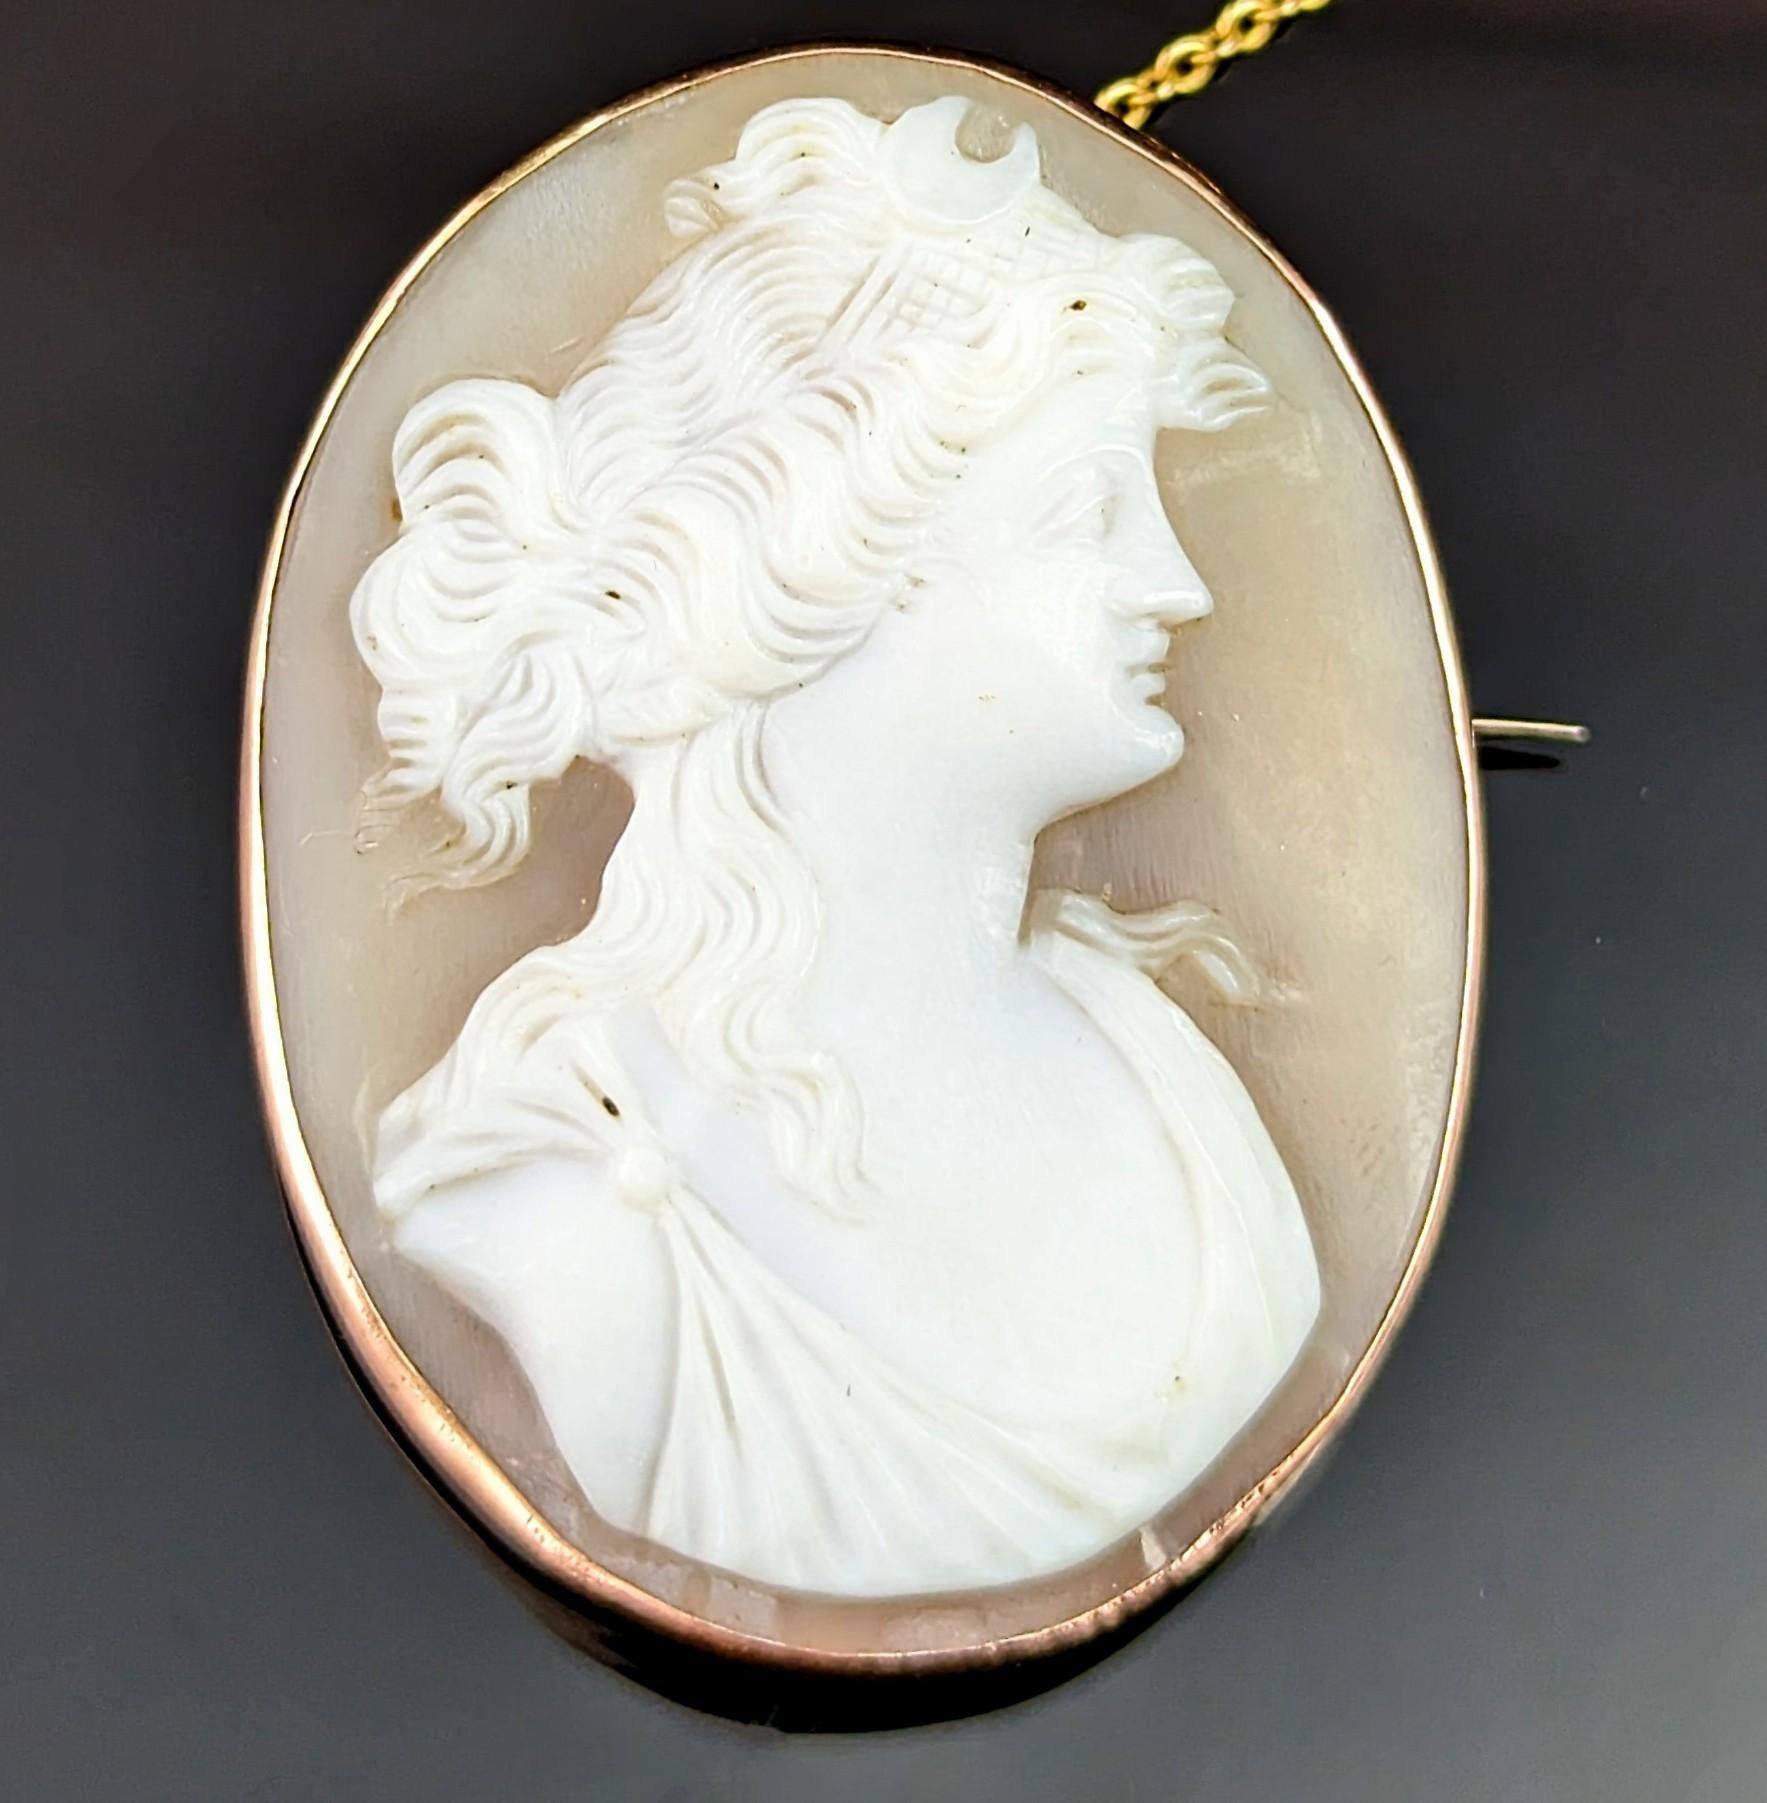 You can't help but admire this attractive antique Edwardian era 9ct gold cameo brooch.

A nicely carved bullmouth shell cameo depicting Nyx the Greek goddess and personification of night housed in a 9ct rose gold frame.

An nice subject matter, it